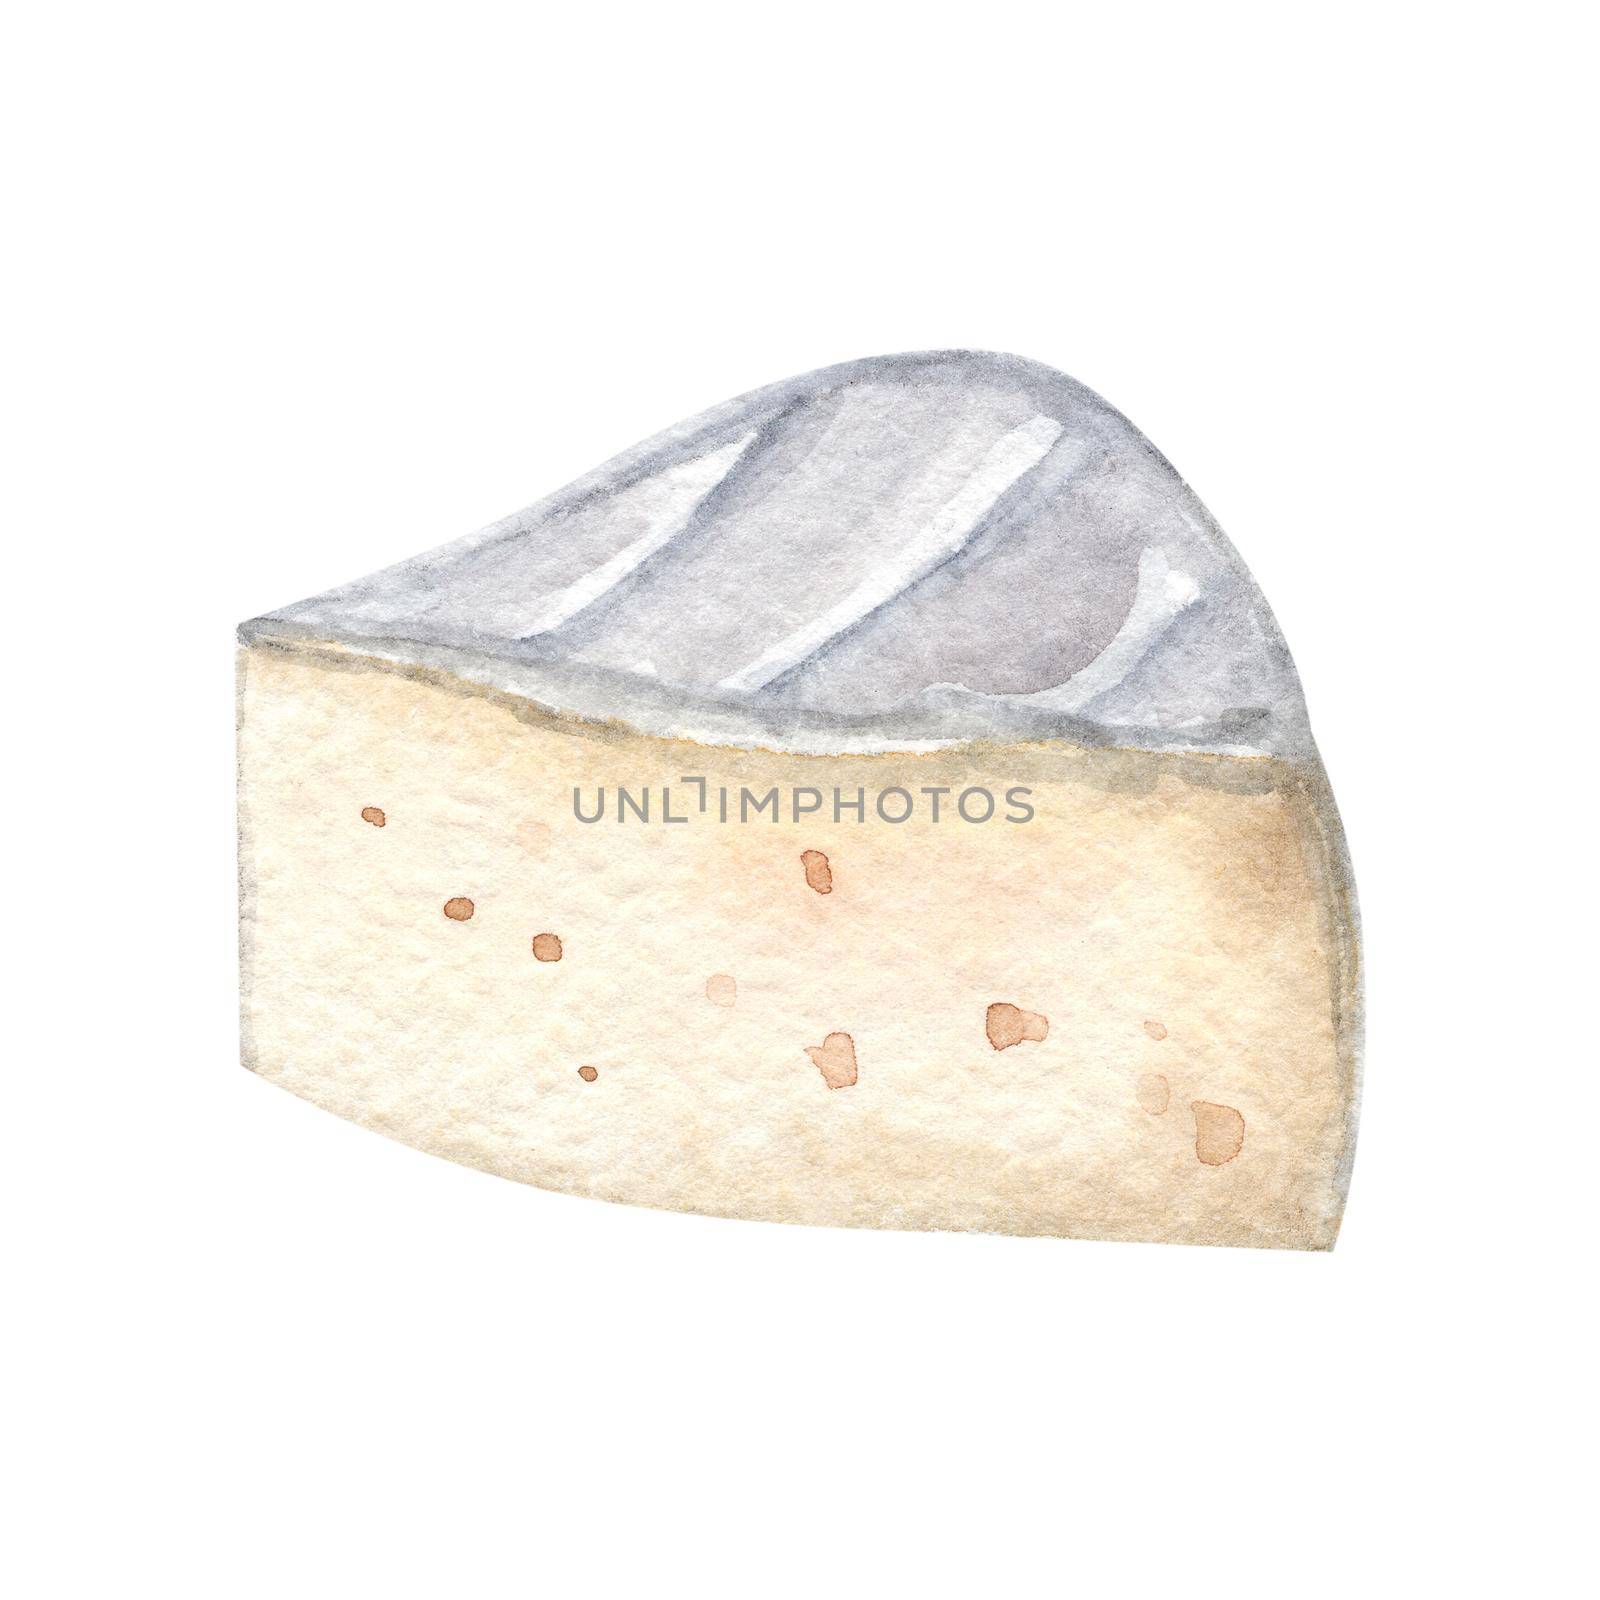 watercolor camembert piece cheese isolated on white background. Hand drawn brie slice illustration